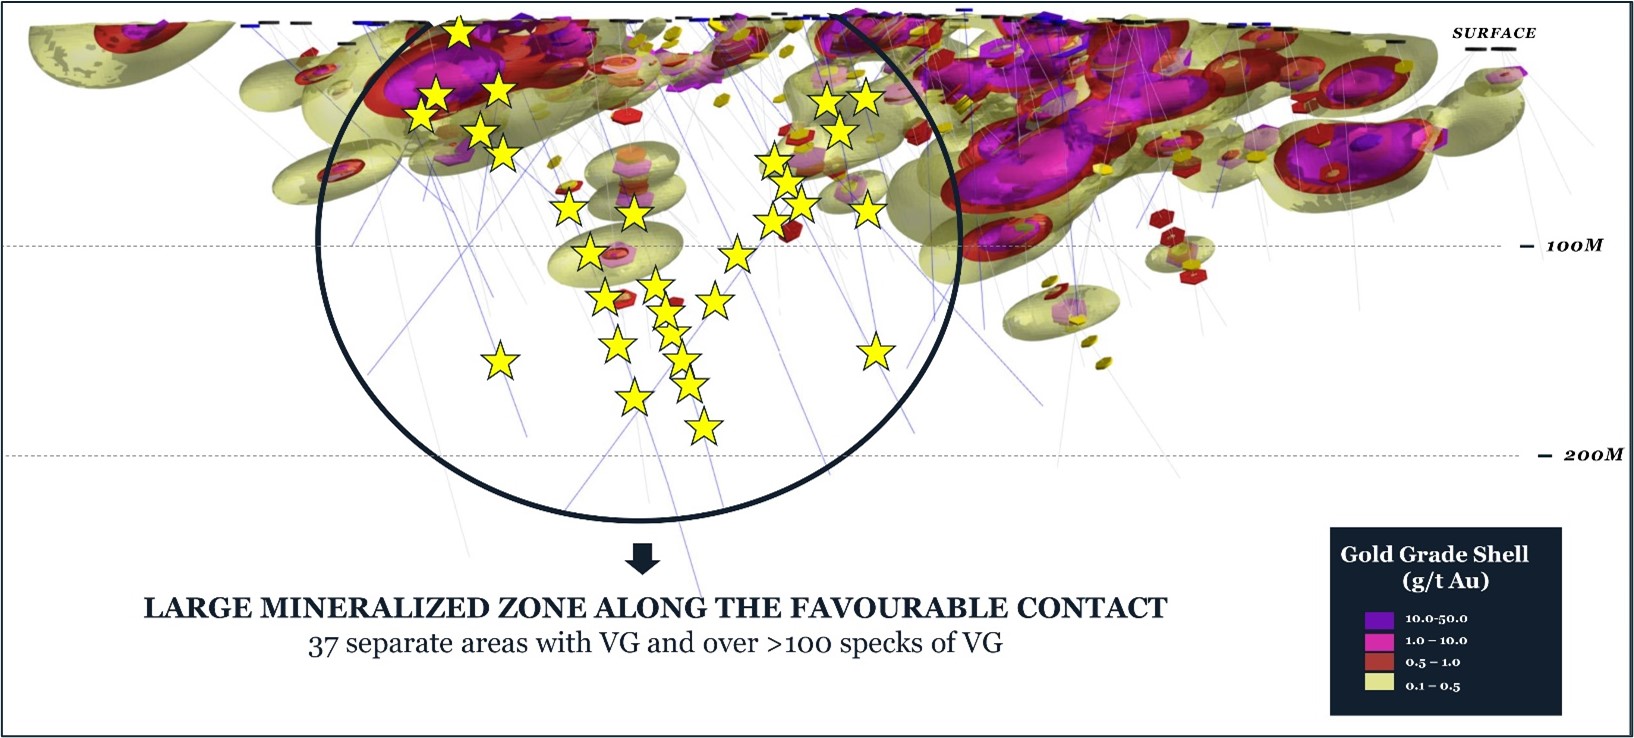 Figure 1. Phase 1 drilling at the Lynx Gold Zone – 3D gold-grade shell